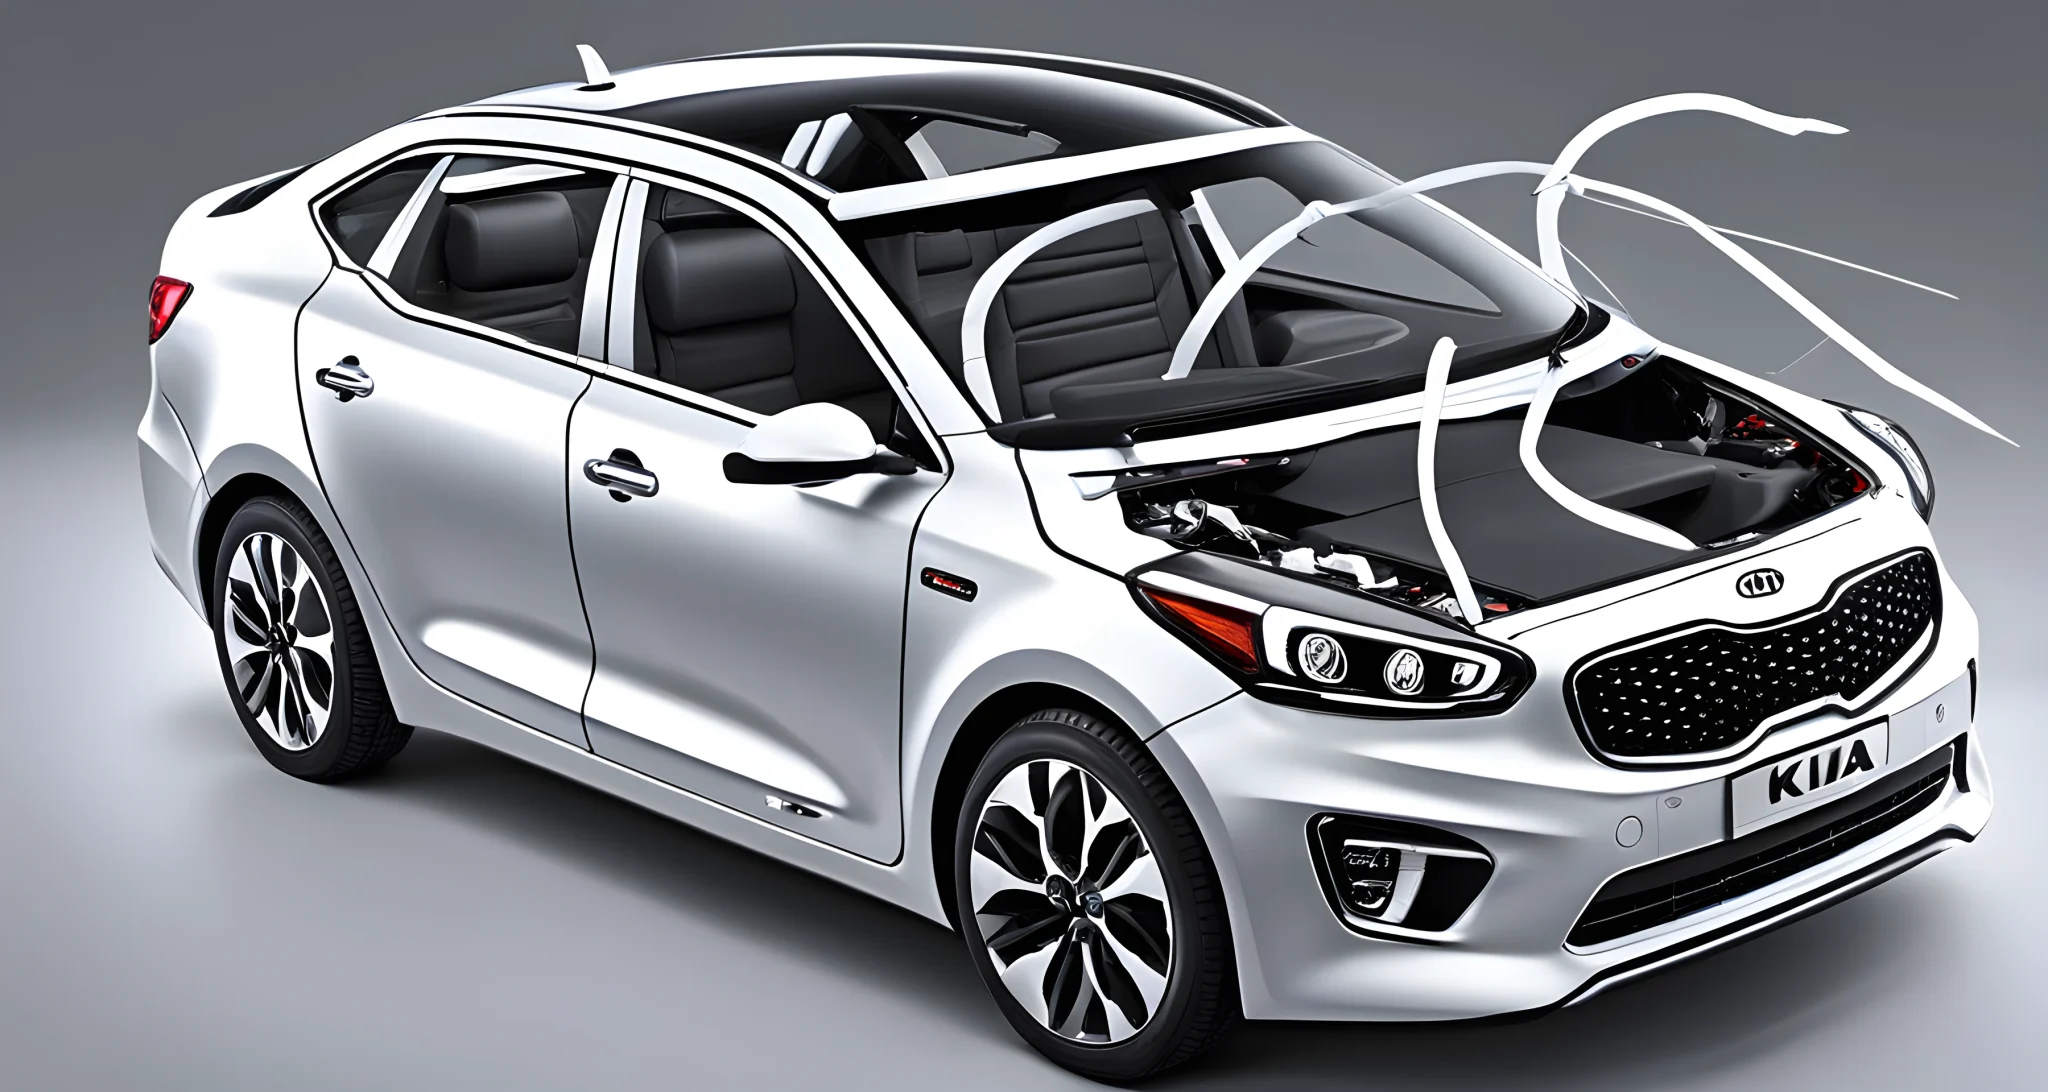 The image shows a front and side view of a Kia vehicle with prominent airbags, reinforced body structure, and crumple zones.